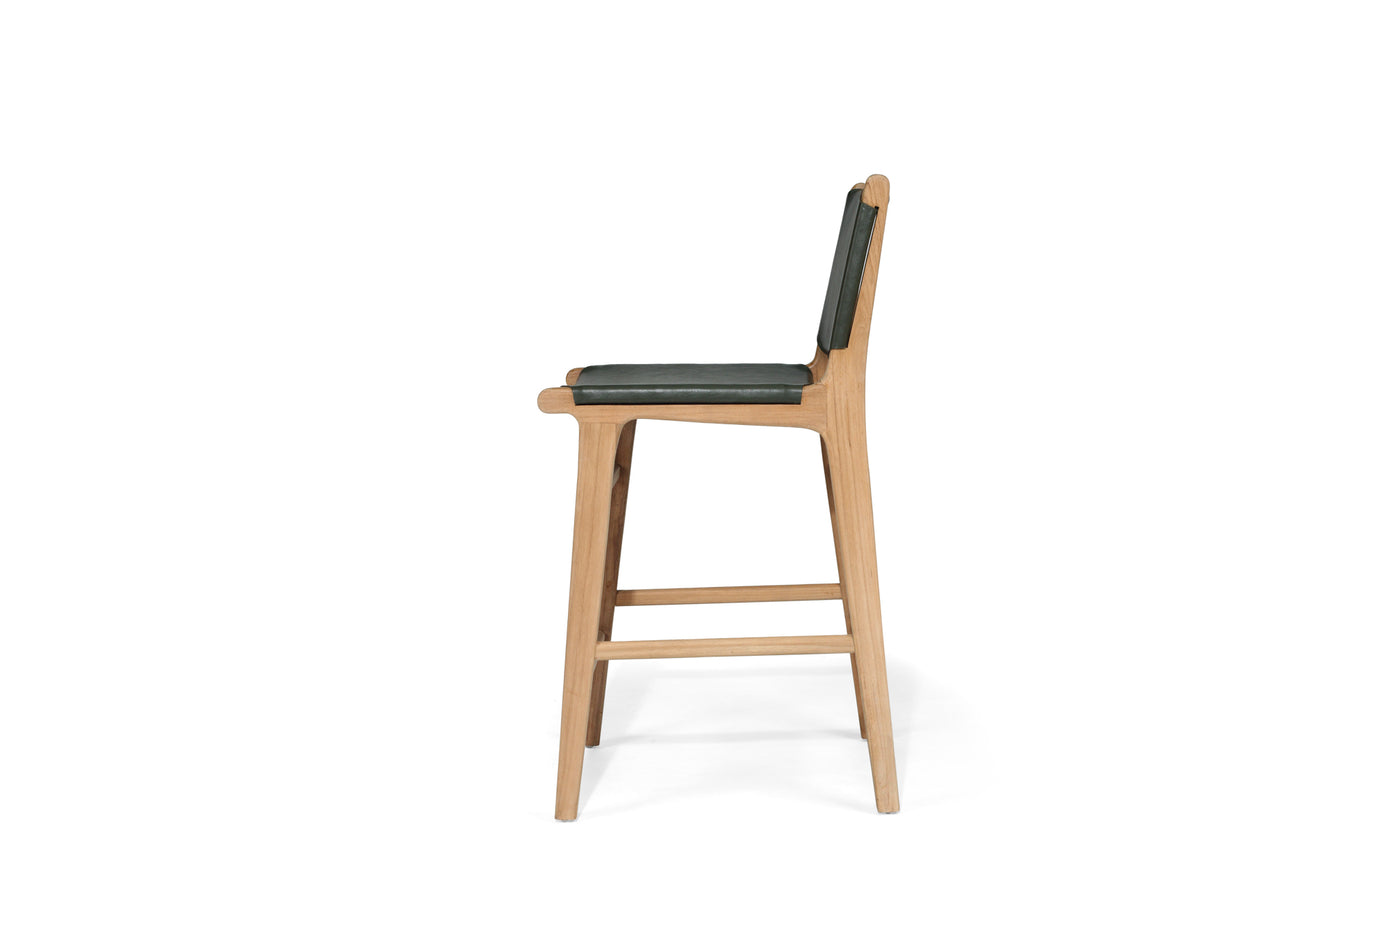 Cashmerie Leather Counter Stool - Olive - Flat